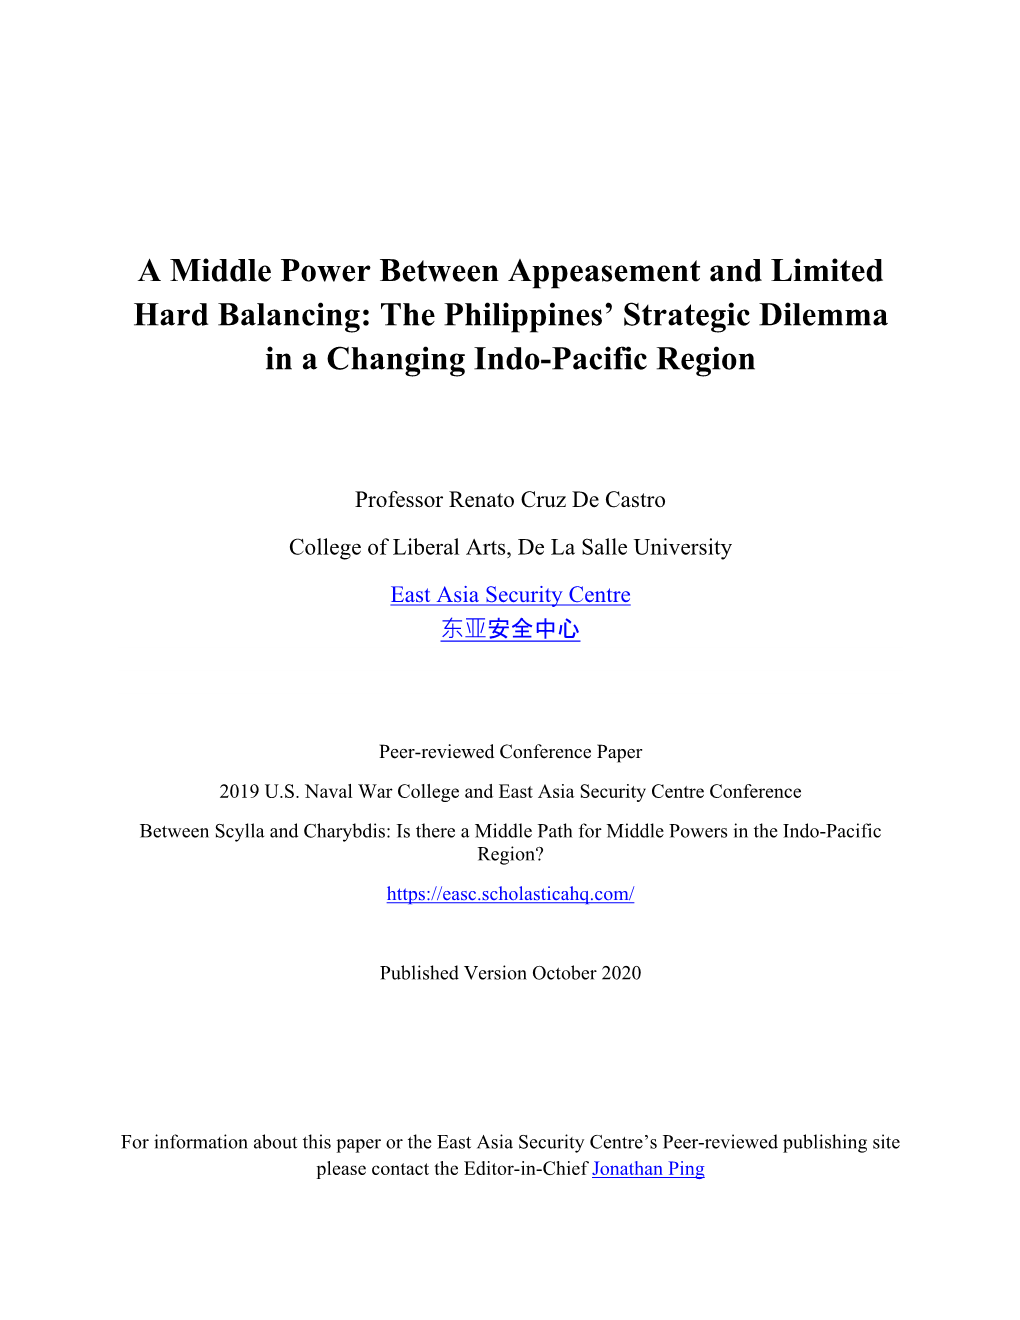 A Middle Power Between Appeasement and Limited Hard Balancing: the Philippines’ Strategic Dilemma in a Changing Indo-Pacific Region